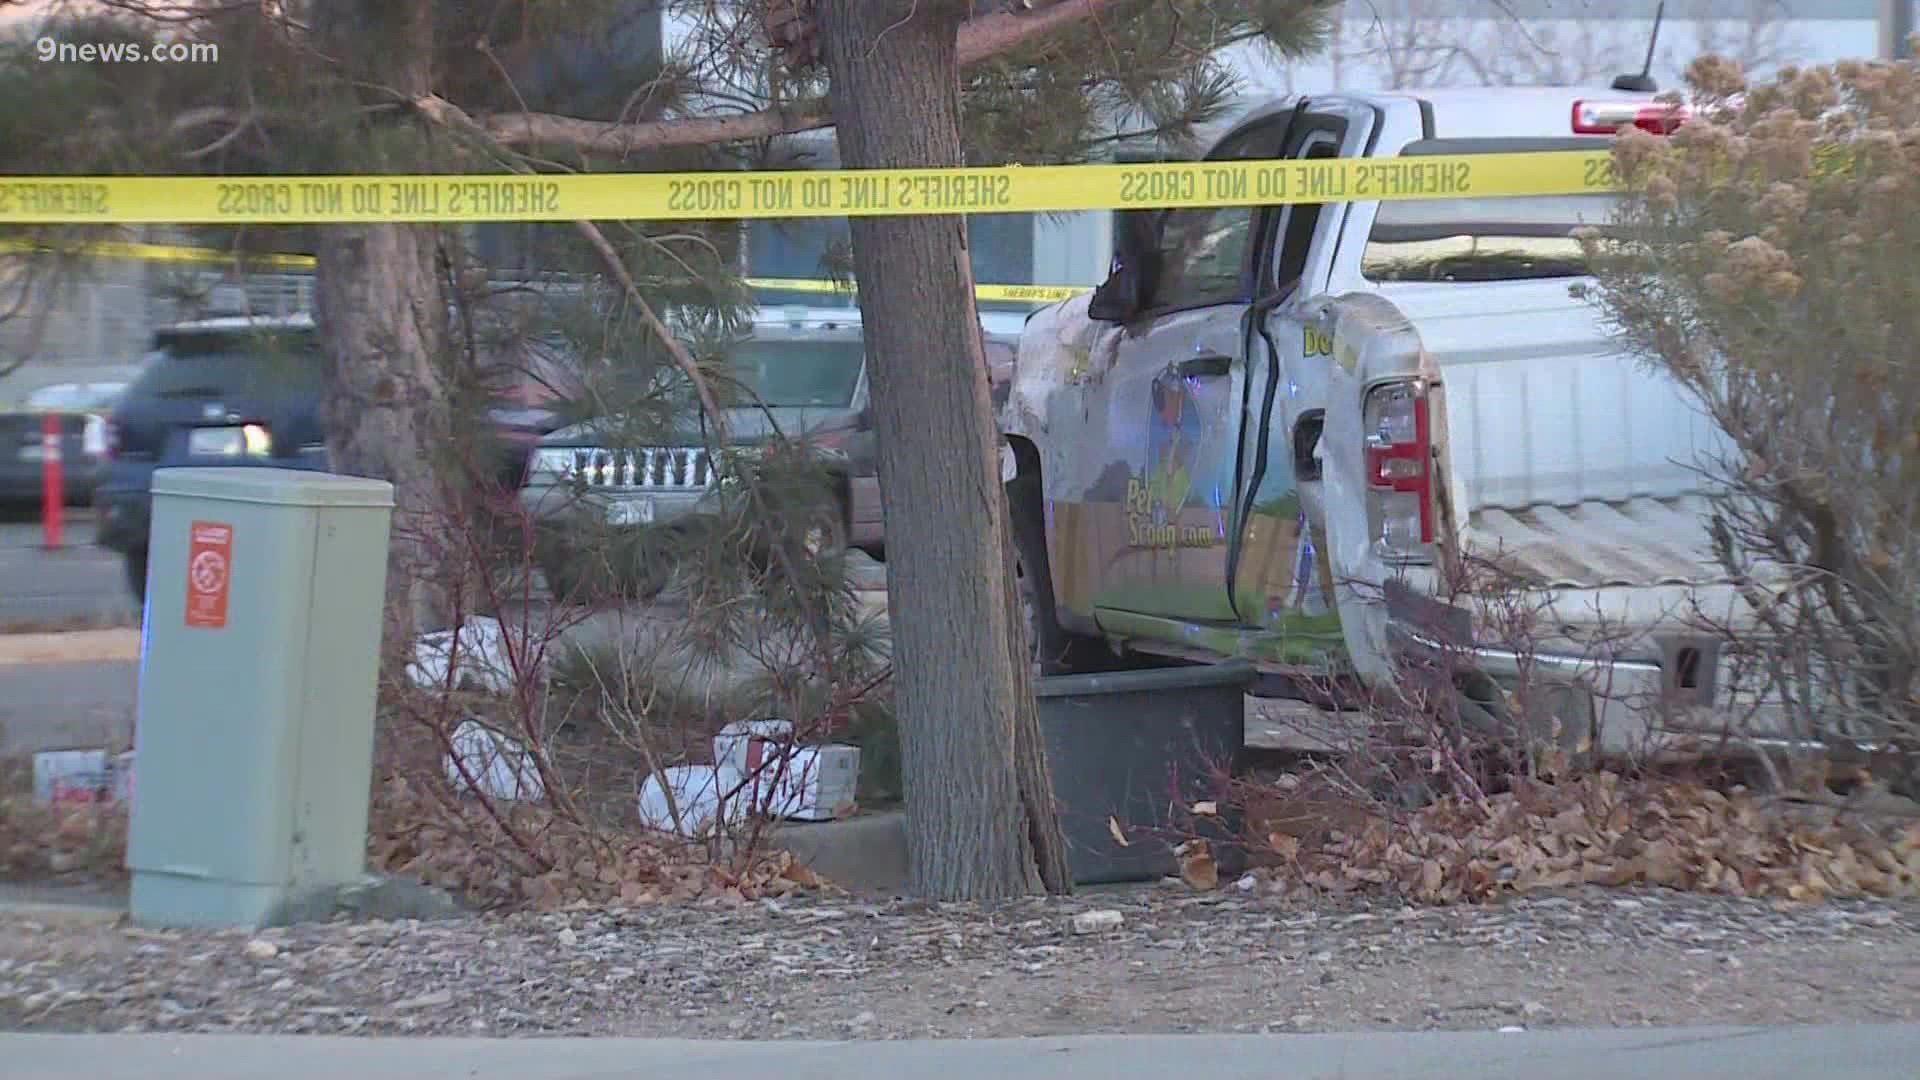 A man and woman were found dead with gunshot wounds in a crashed vehicle in Centennial Monday, according to the Arapahoe County Sheriff's Office.